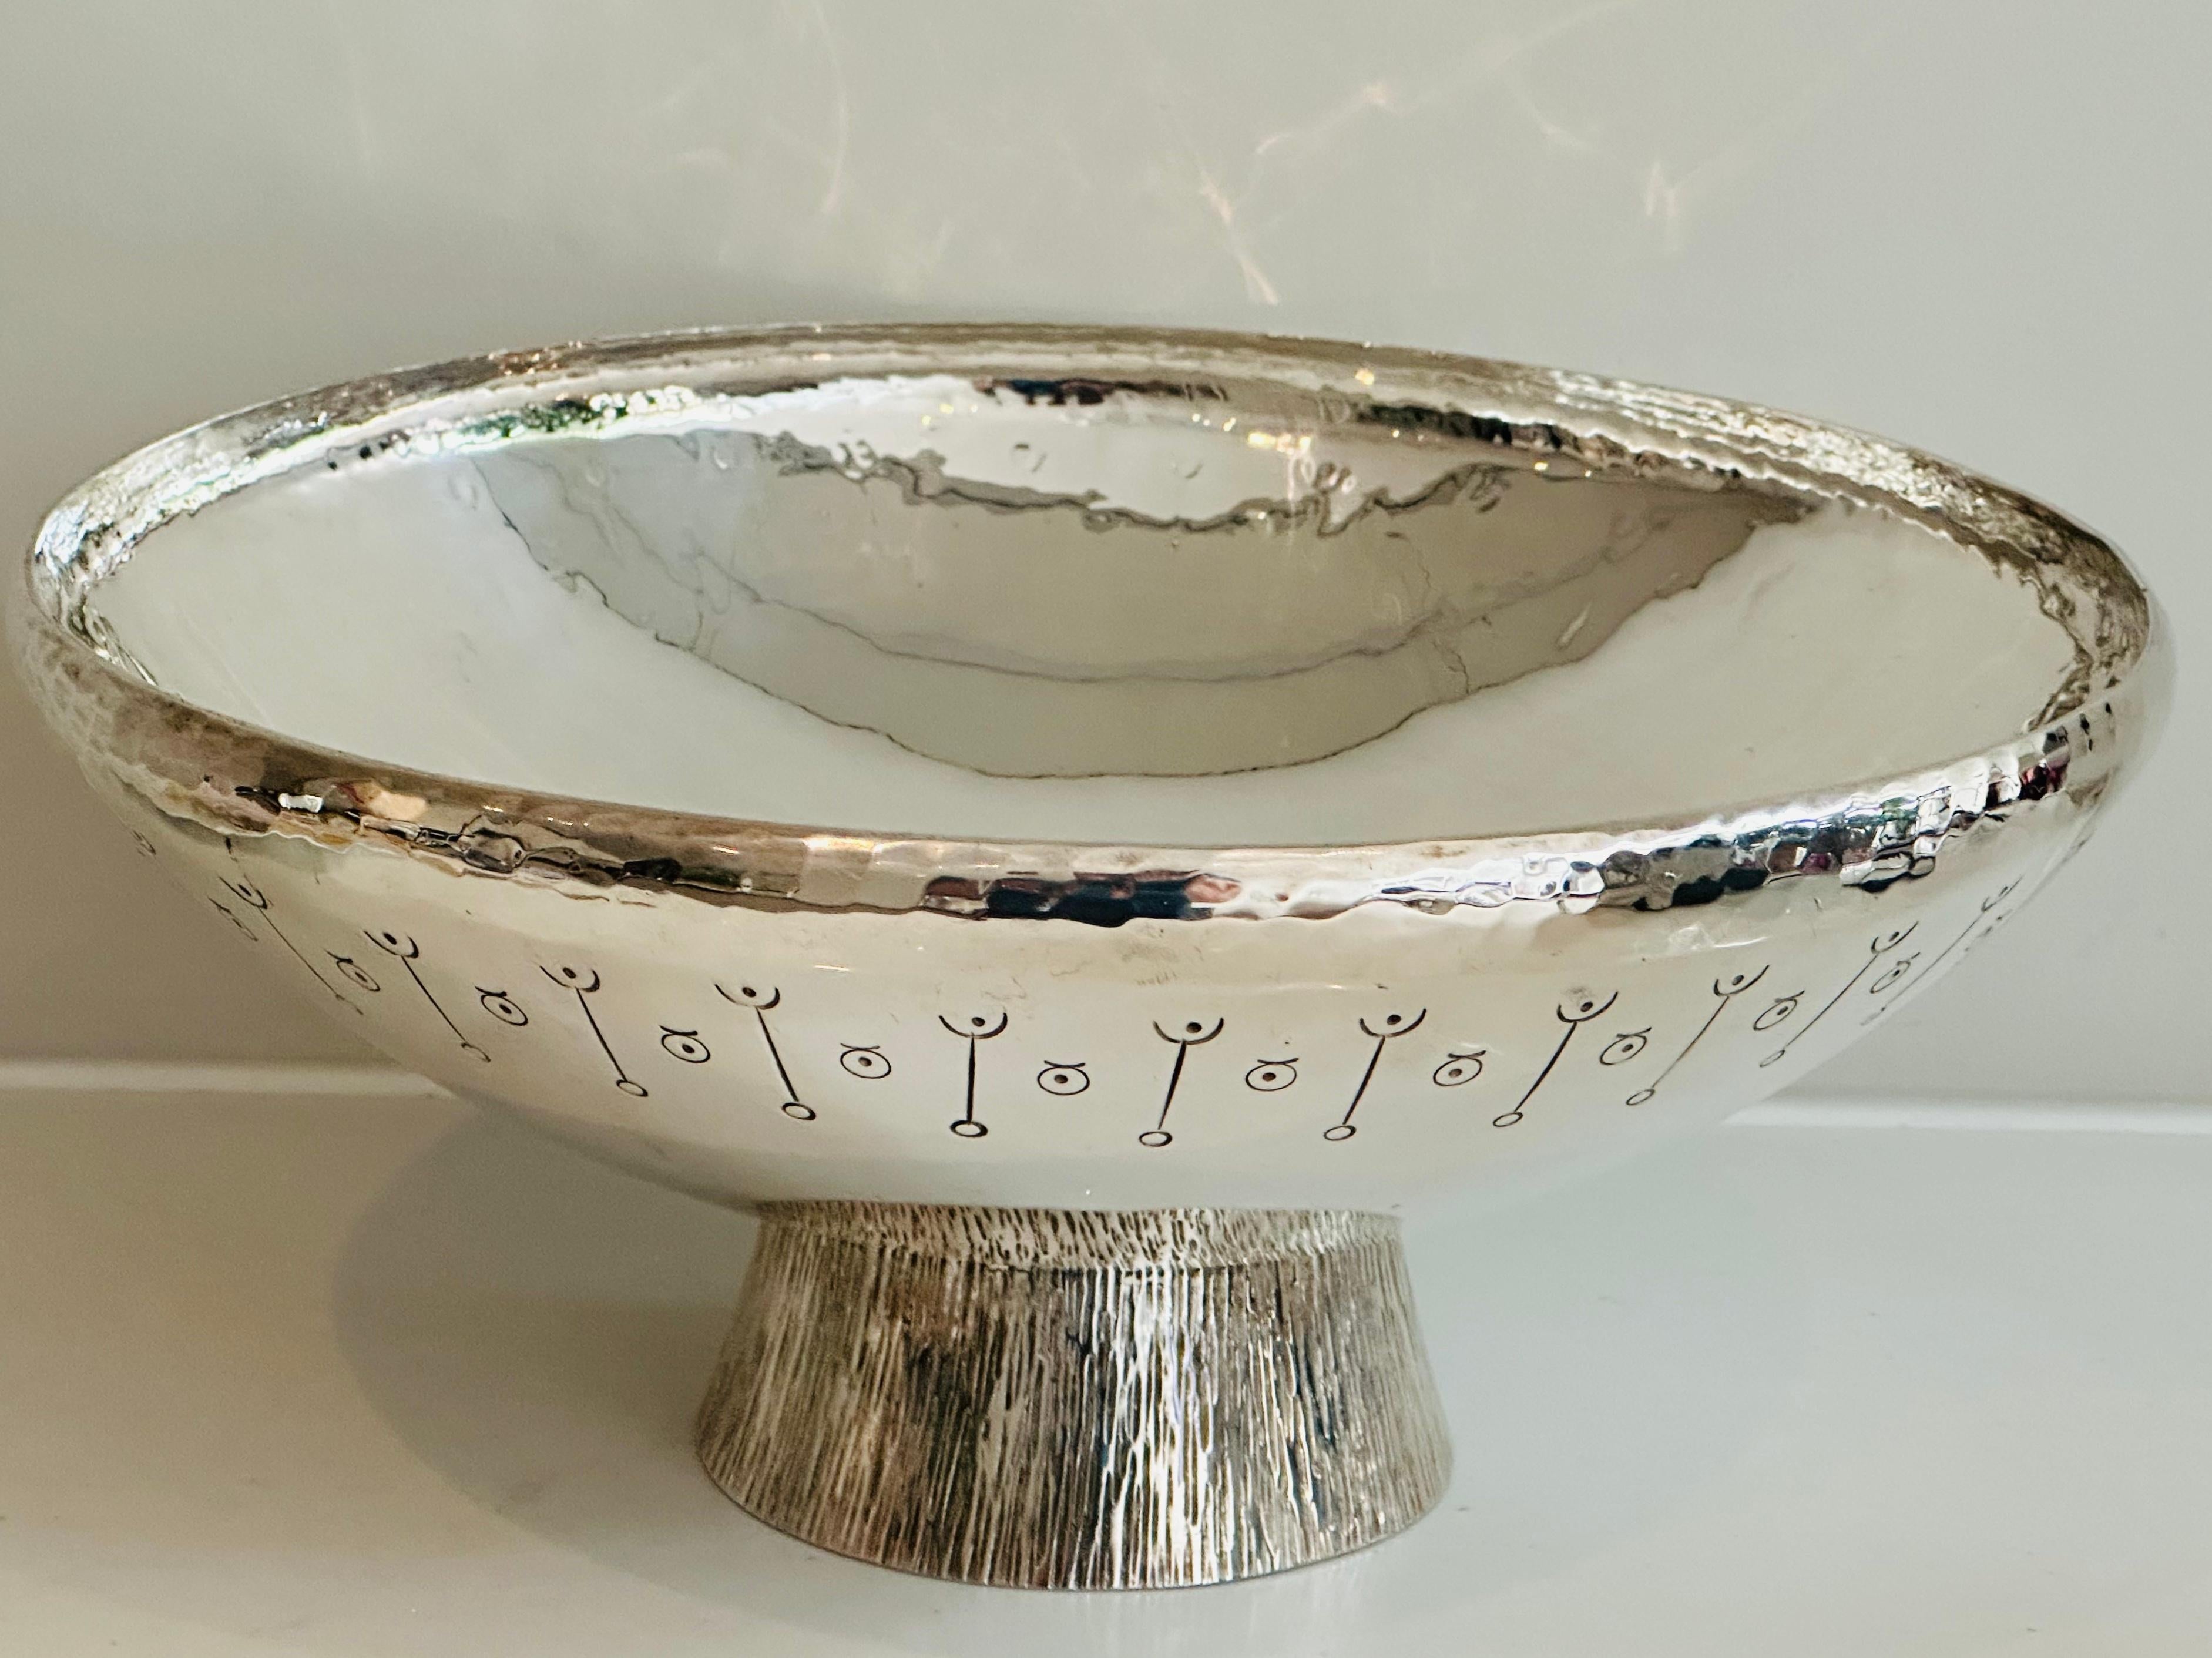 1980s English Silver Plated Decorative Hand-Hammered Serving or Display Bowl 1